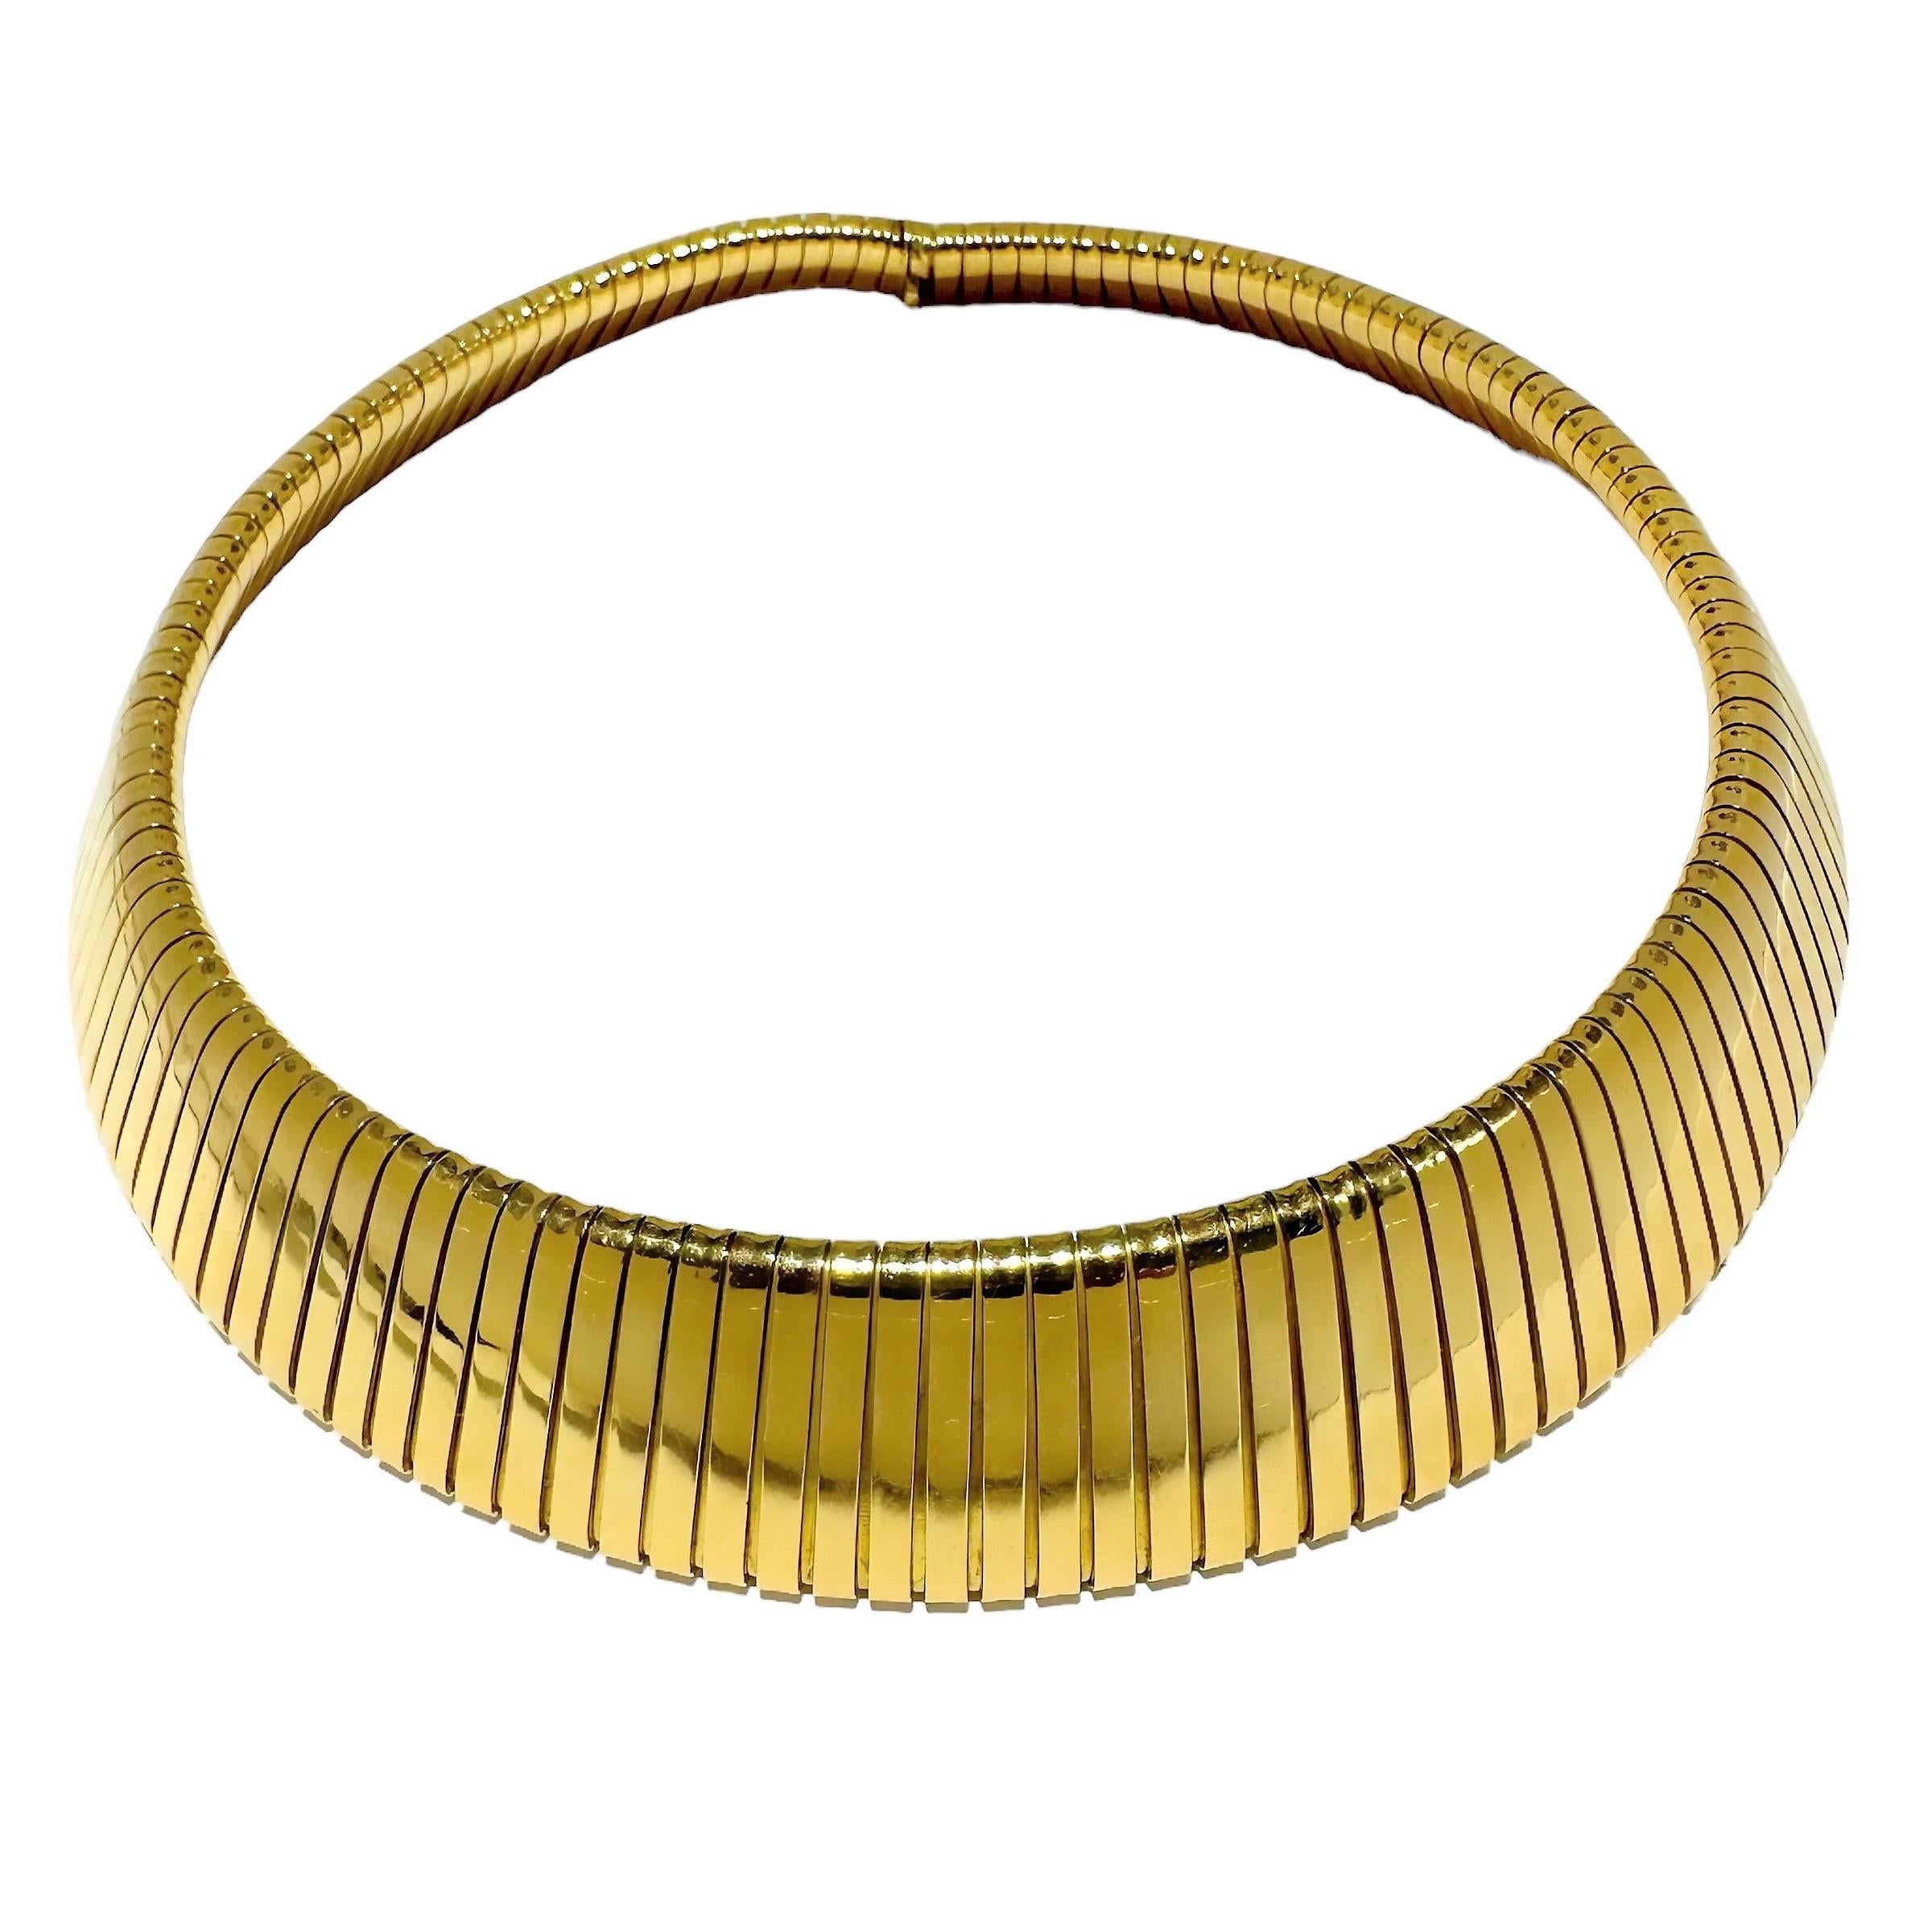 This imposing mid-20th Century Italian wide tubogas choker necklace measures a full 7/8 of an inch at it's center and tapers slightly to 9/16 inches at the rear.  It is stamped 750, indicating 18K gold and bears a workshop mark for items made in